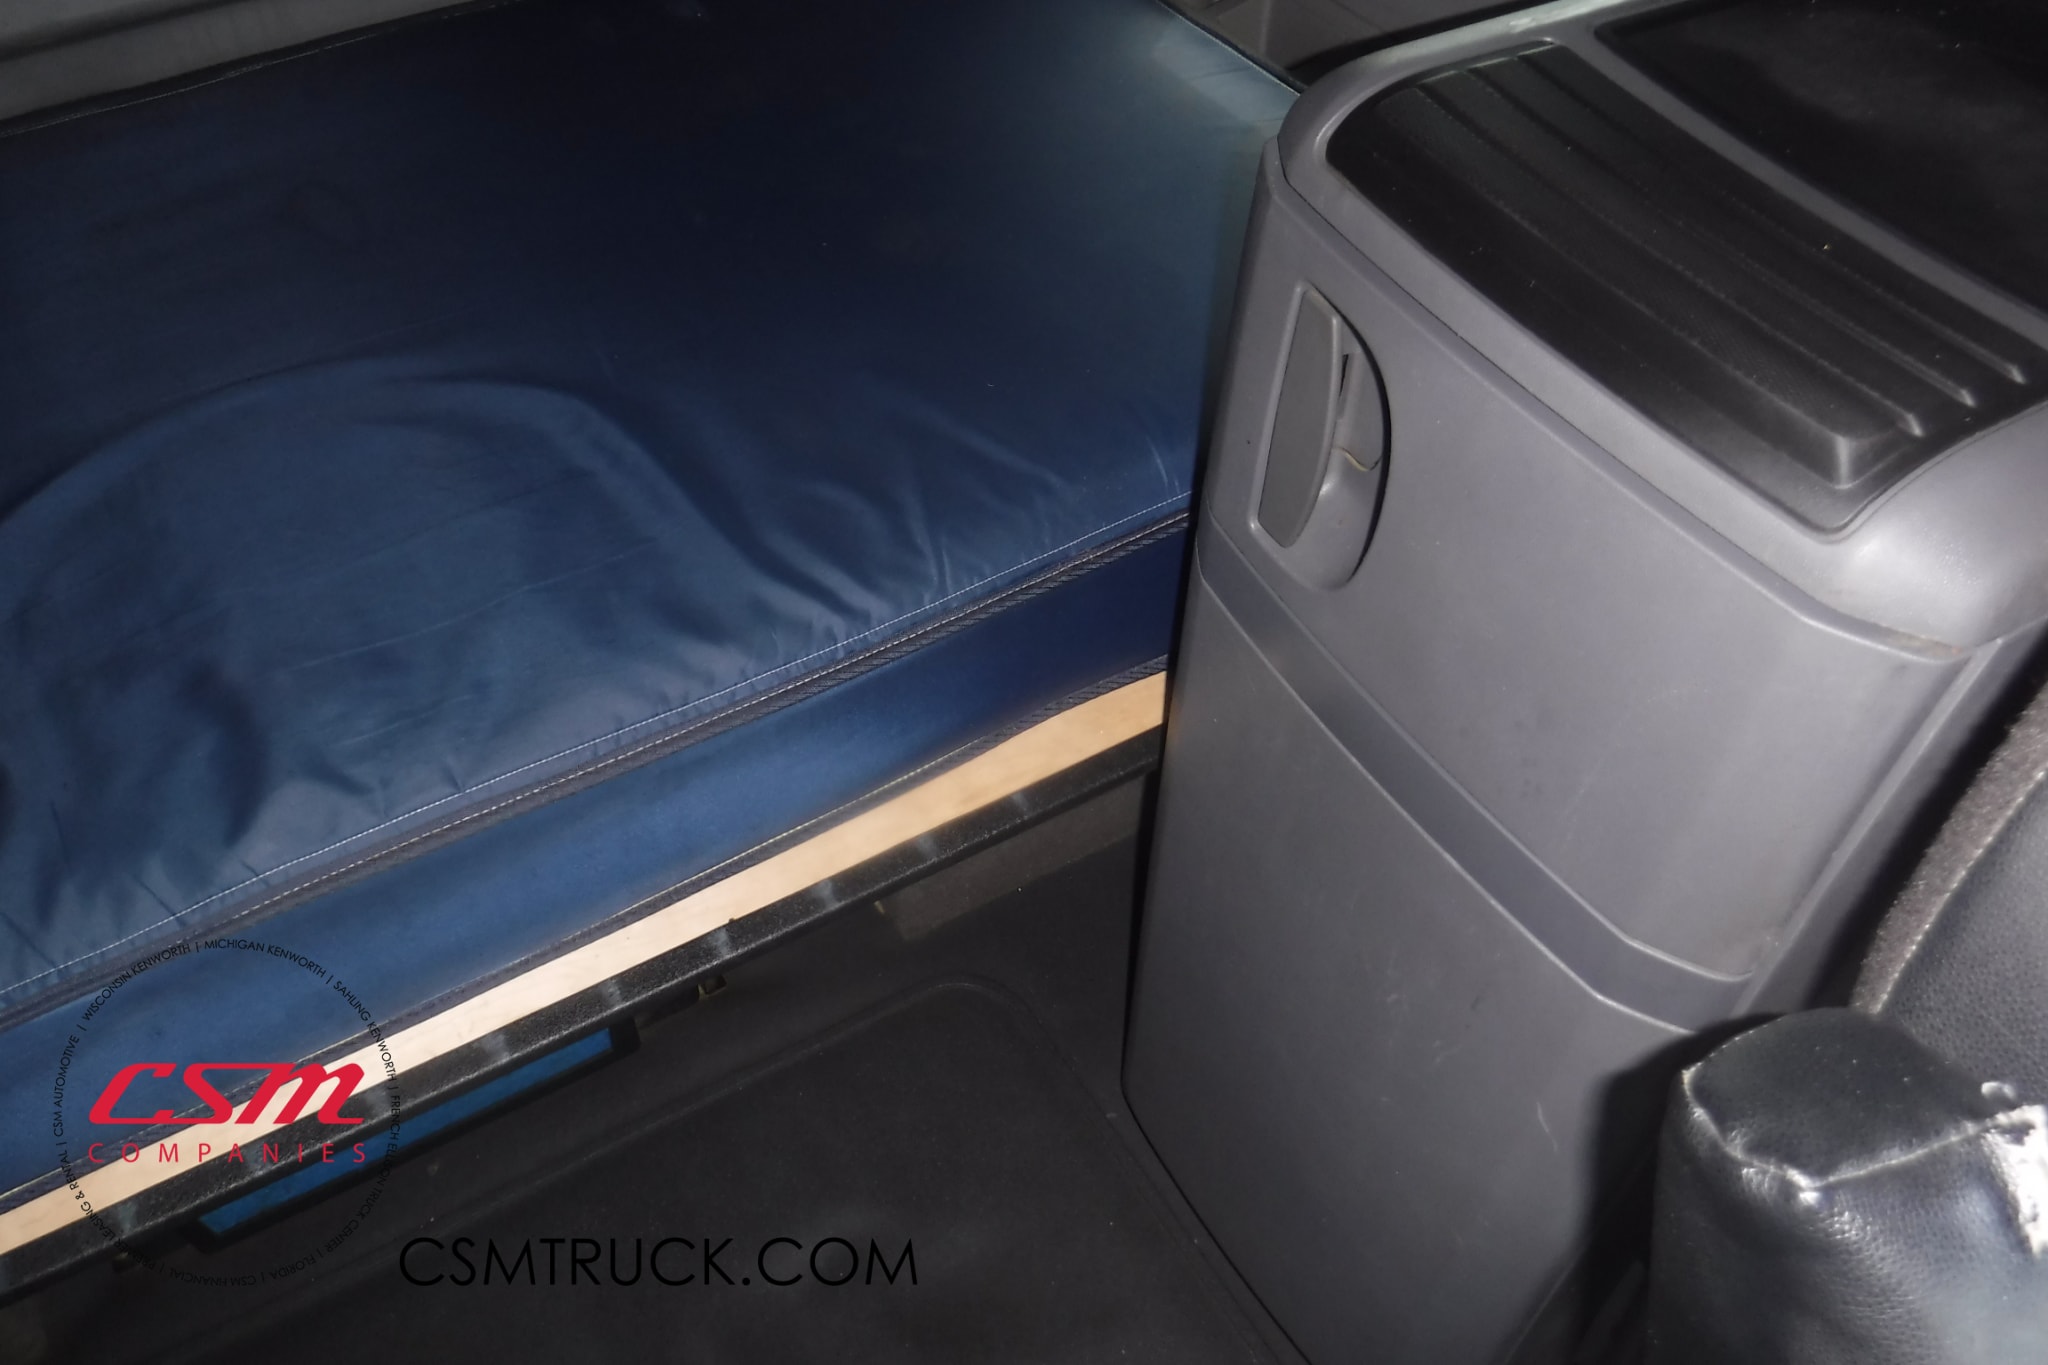 Interior driver side sleeper for this 2019 International LT (Stock number: UKN325713)